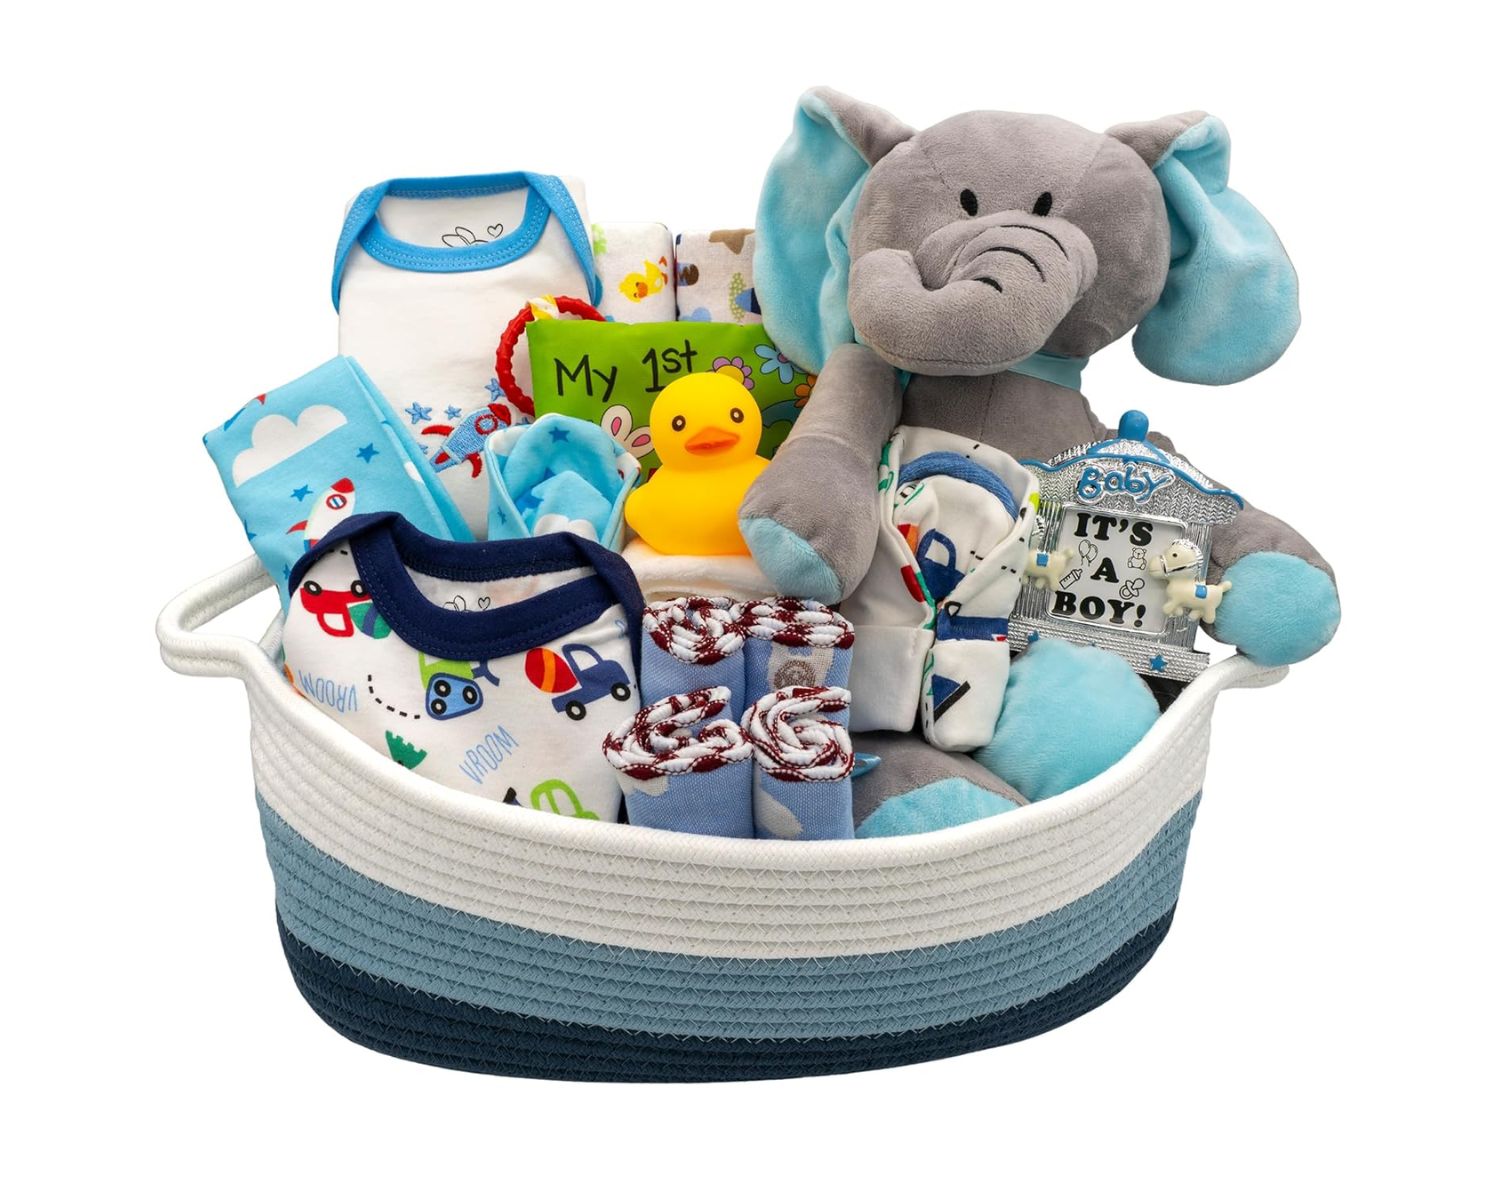 Review: Newborn Gift Set – The Perfect Present for Your Little One